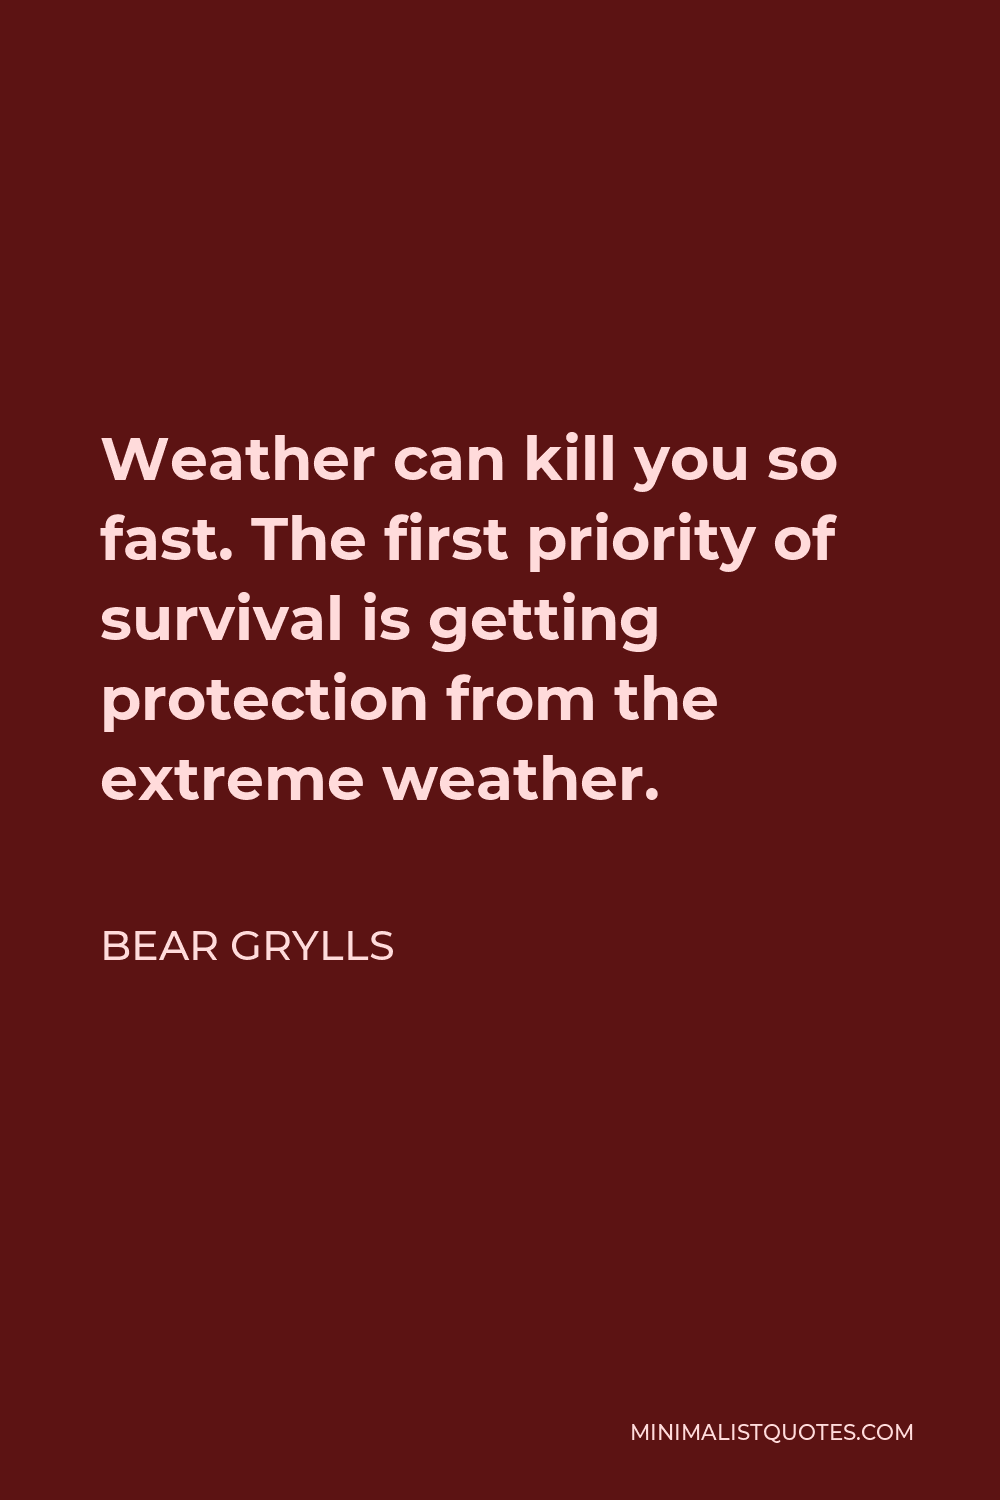 Bear Grylls Quote - Weather can kill you so fast. The first priority of survival is getting protection from the extreme weather.